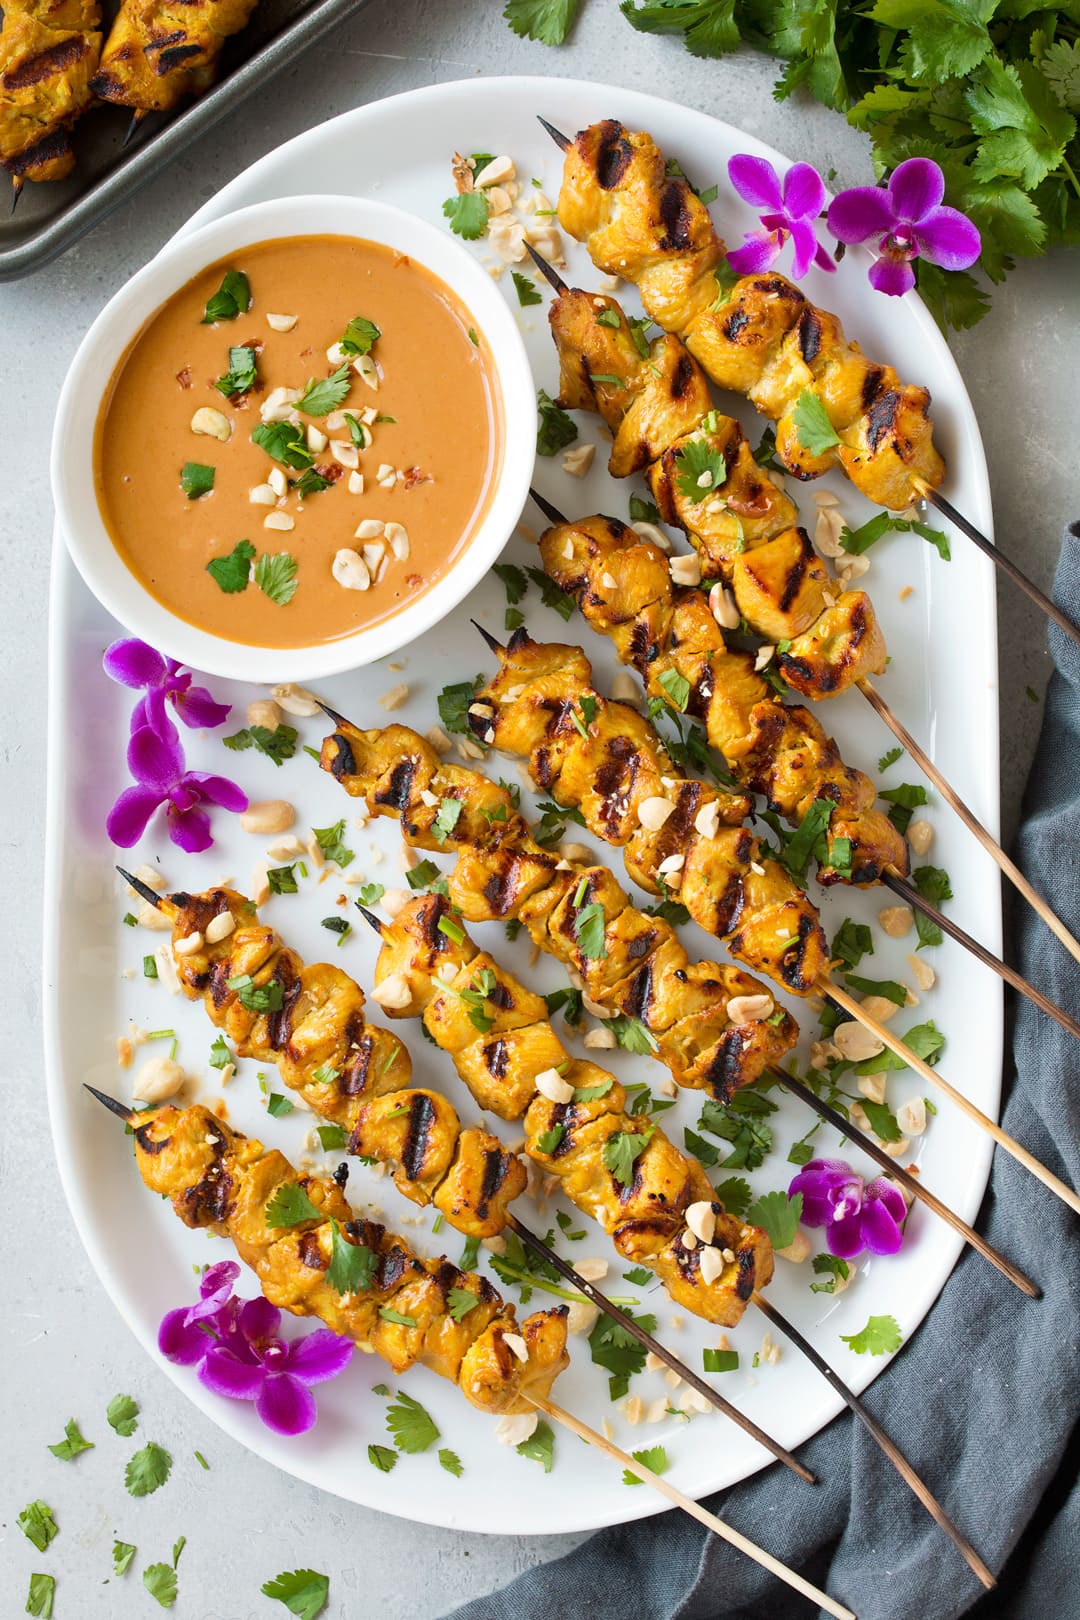 Chicken Satay With Peanut Sauce Cooking Classy,How To Freeze Mushrooms Safely